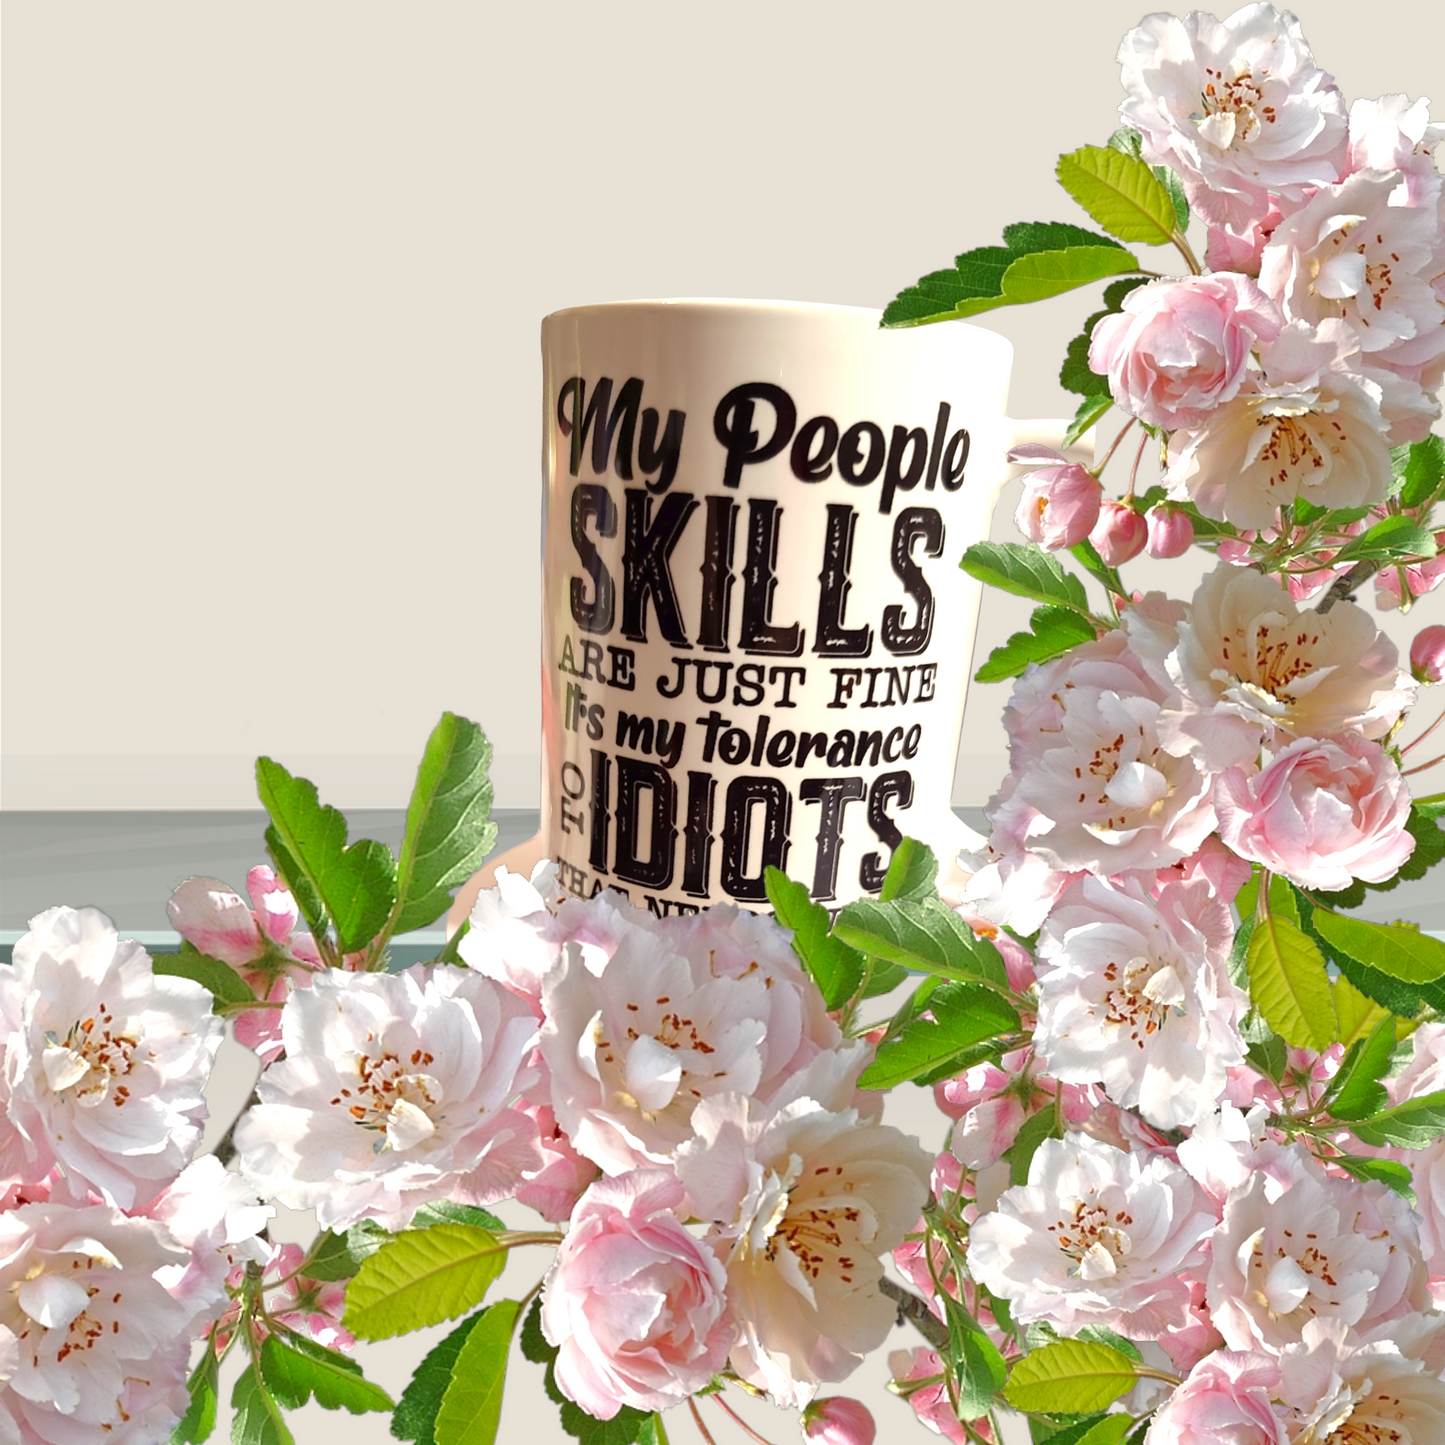 Coffee mug with sarcasm or funny quote. Coffee cup with humor. Customized teacup for a gift. Drinkware with a people skills and idiot quote.